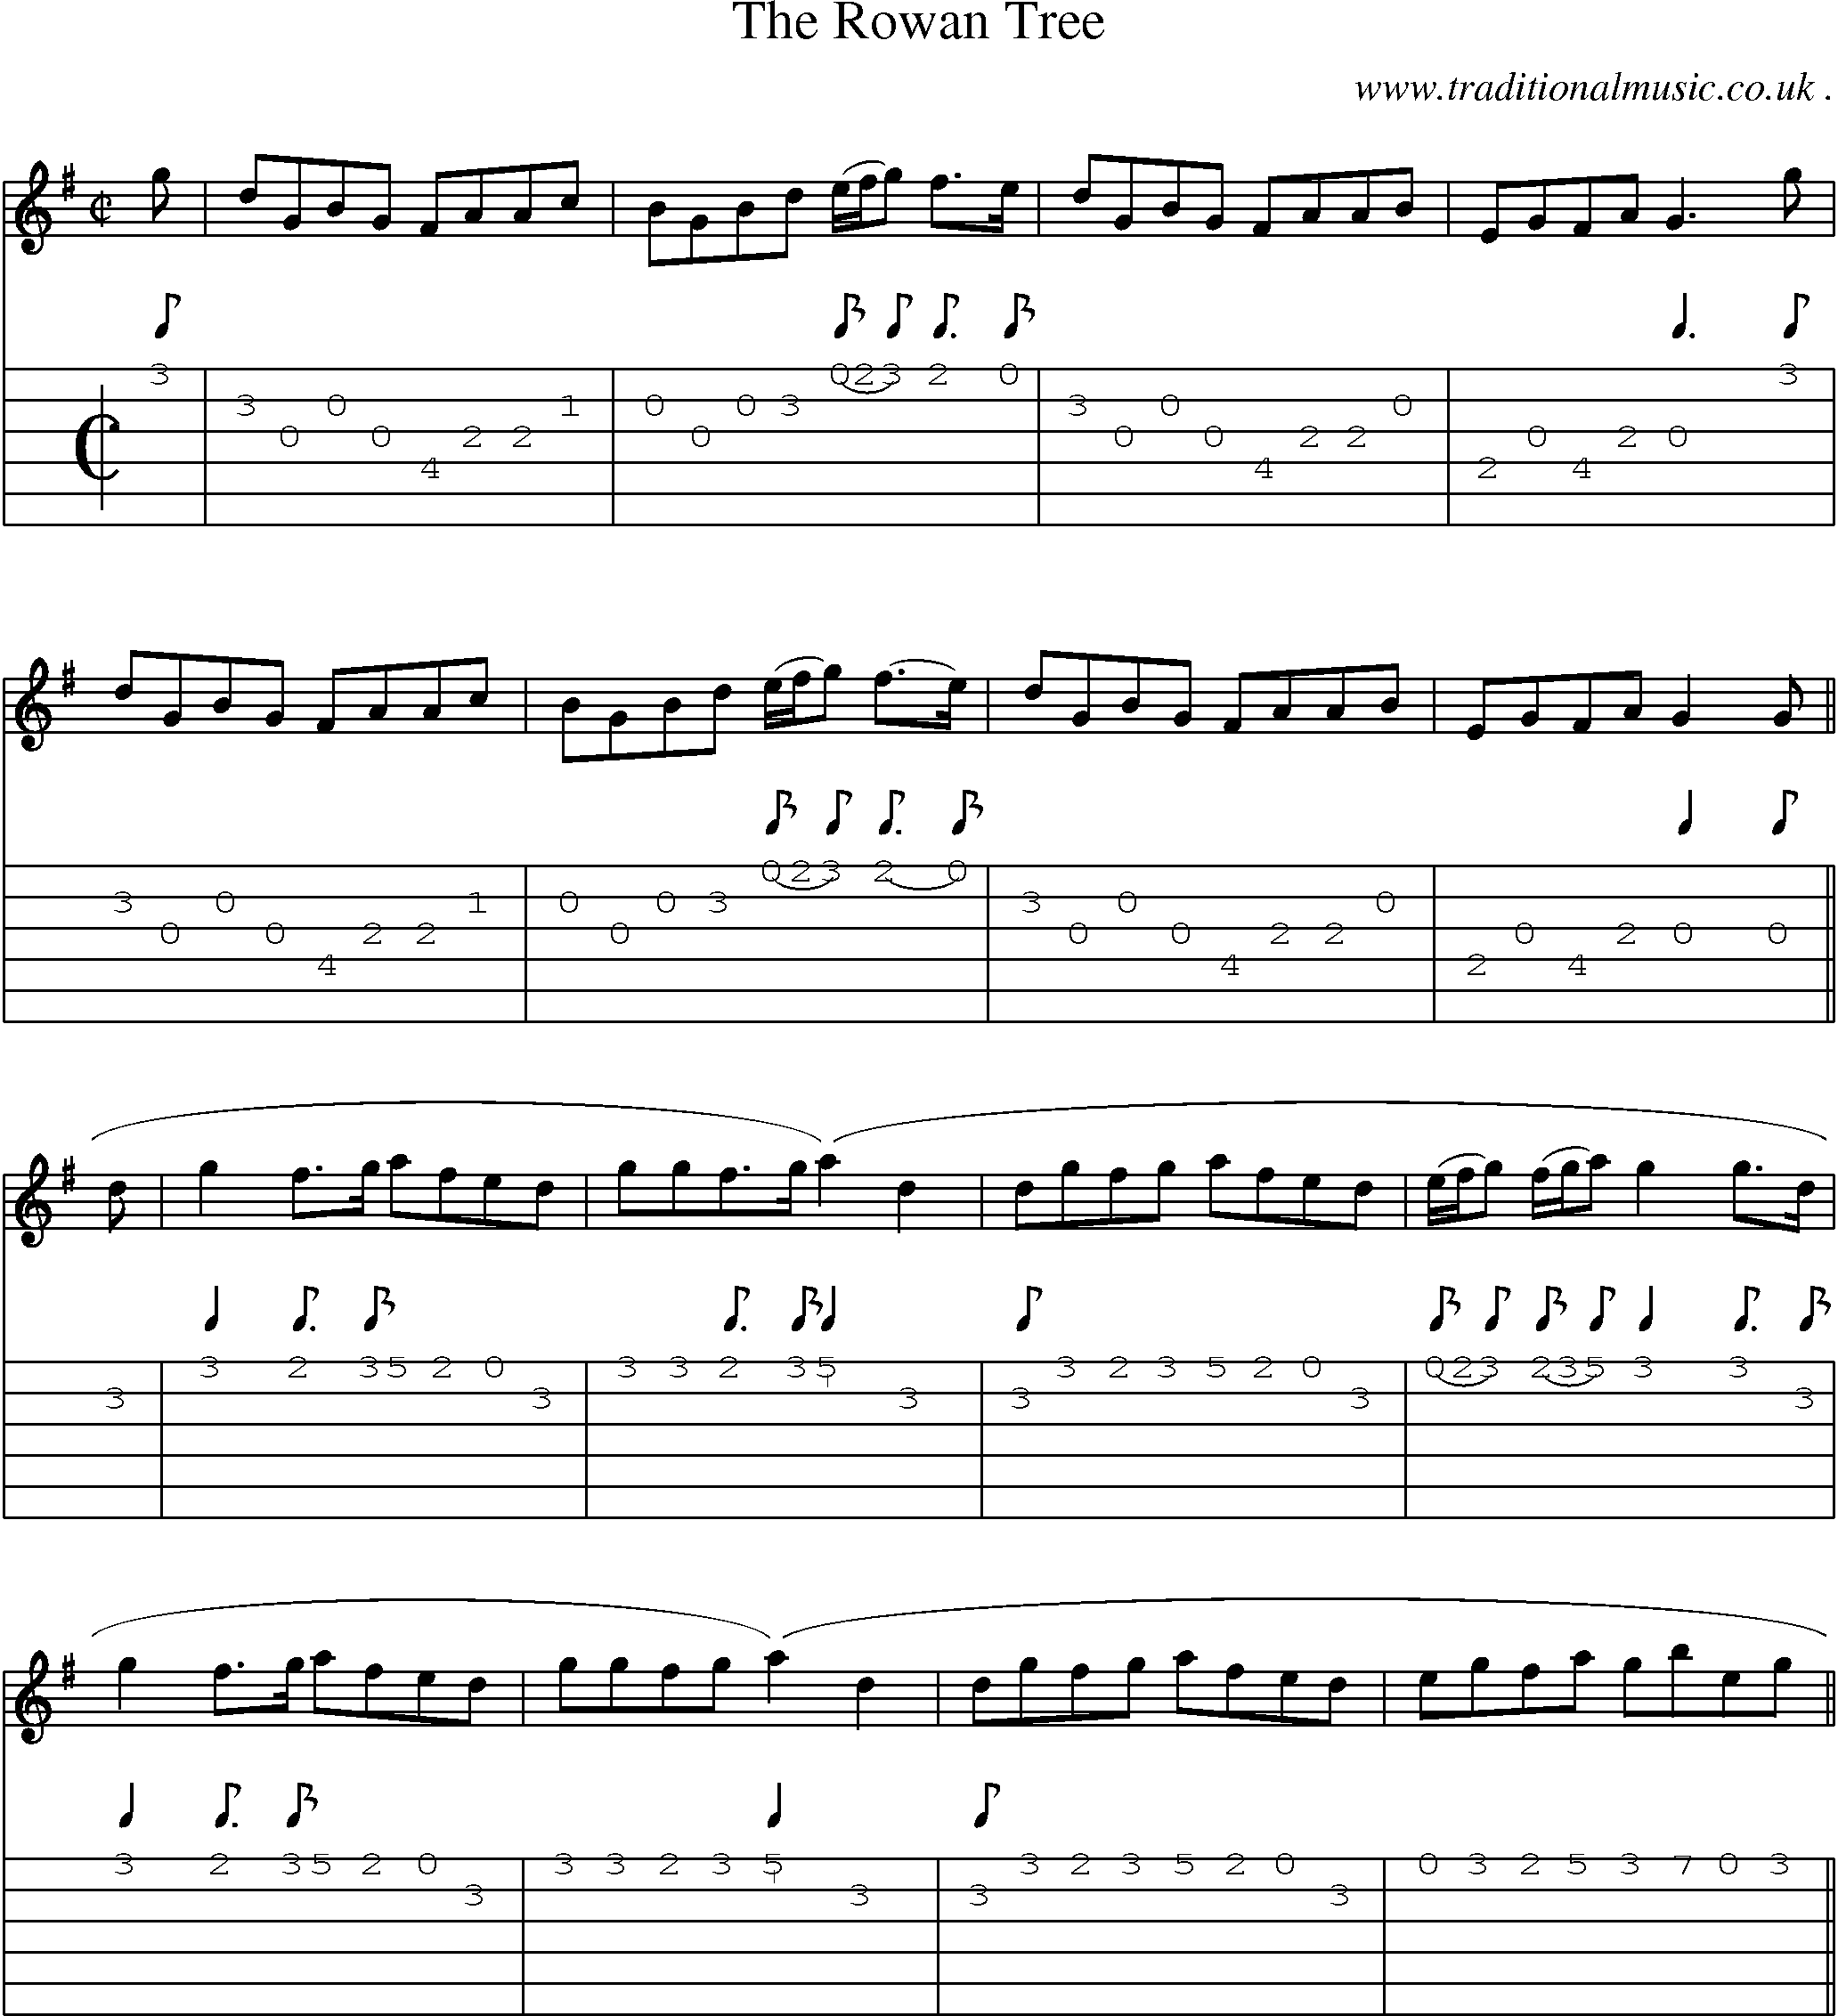 Sheet-Music and Guitar Tabs for The Rowan Tree